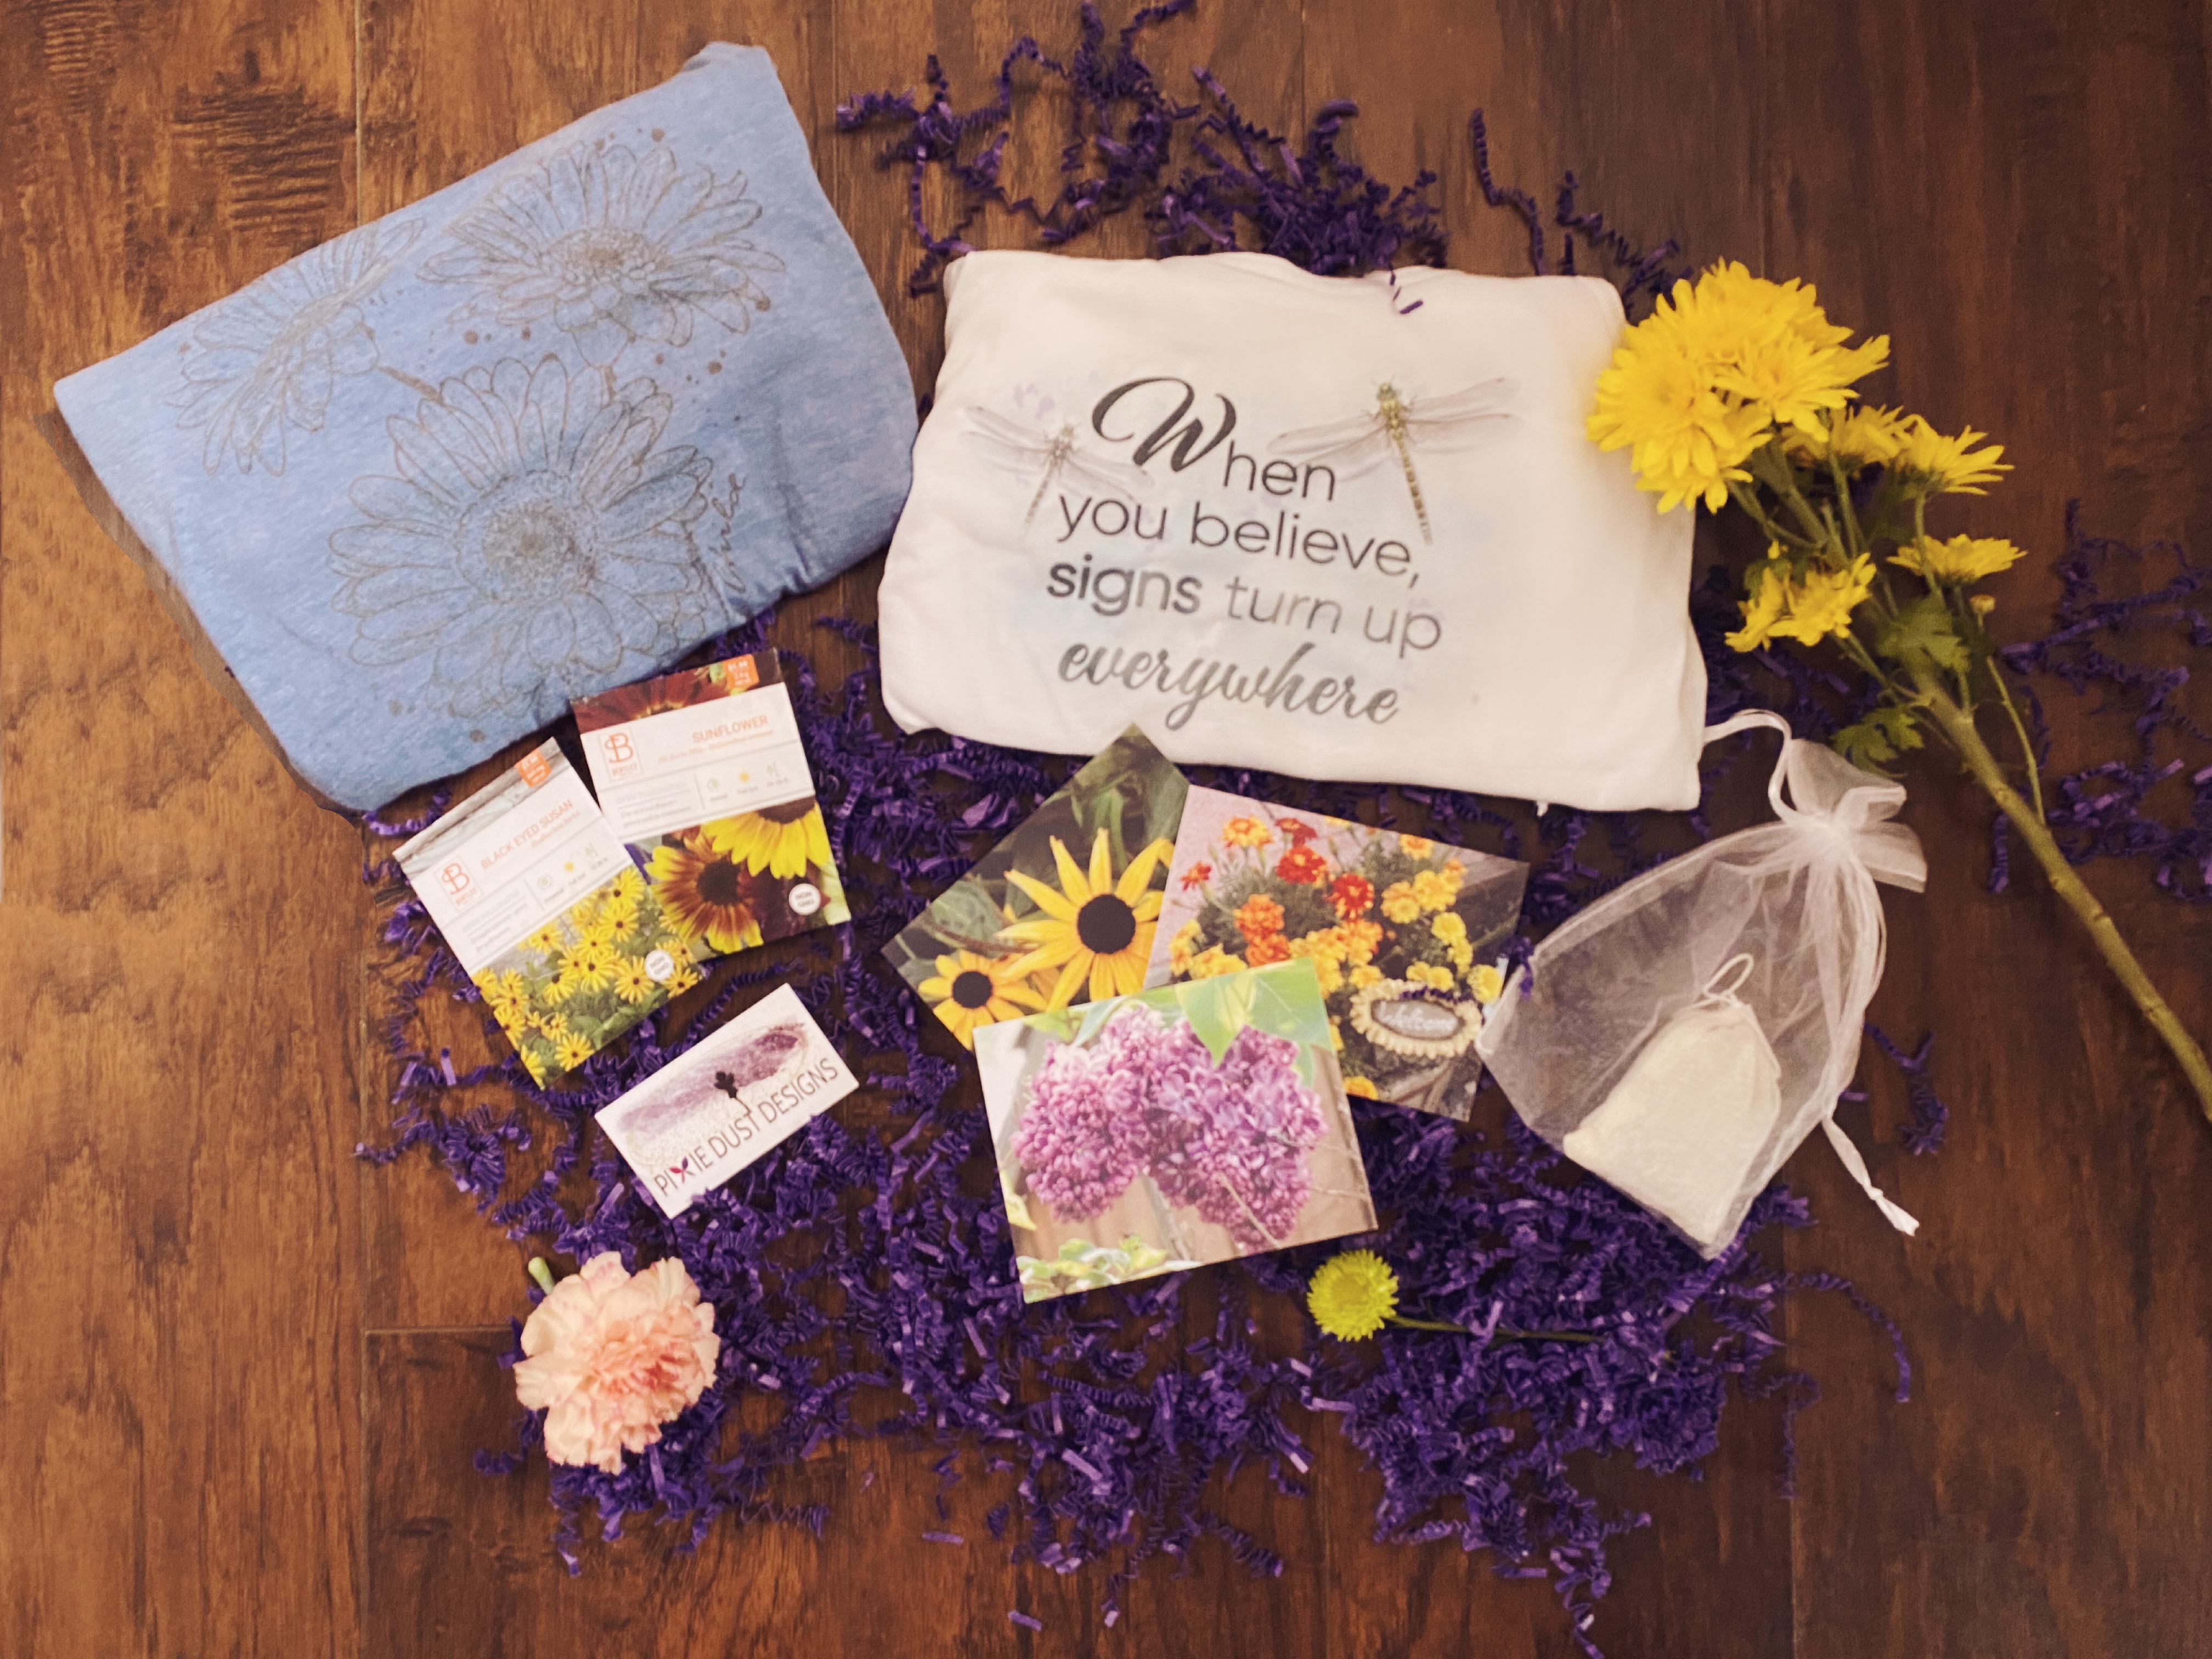 Unboxing The Happiness Box from Pixie Dust Designs Co.